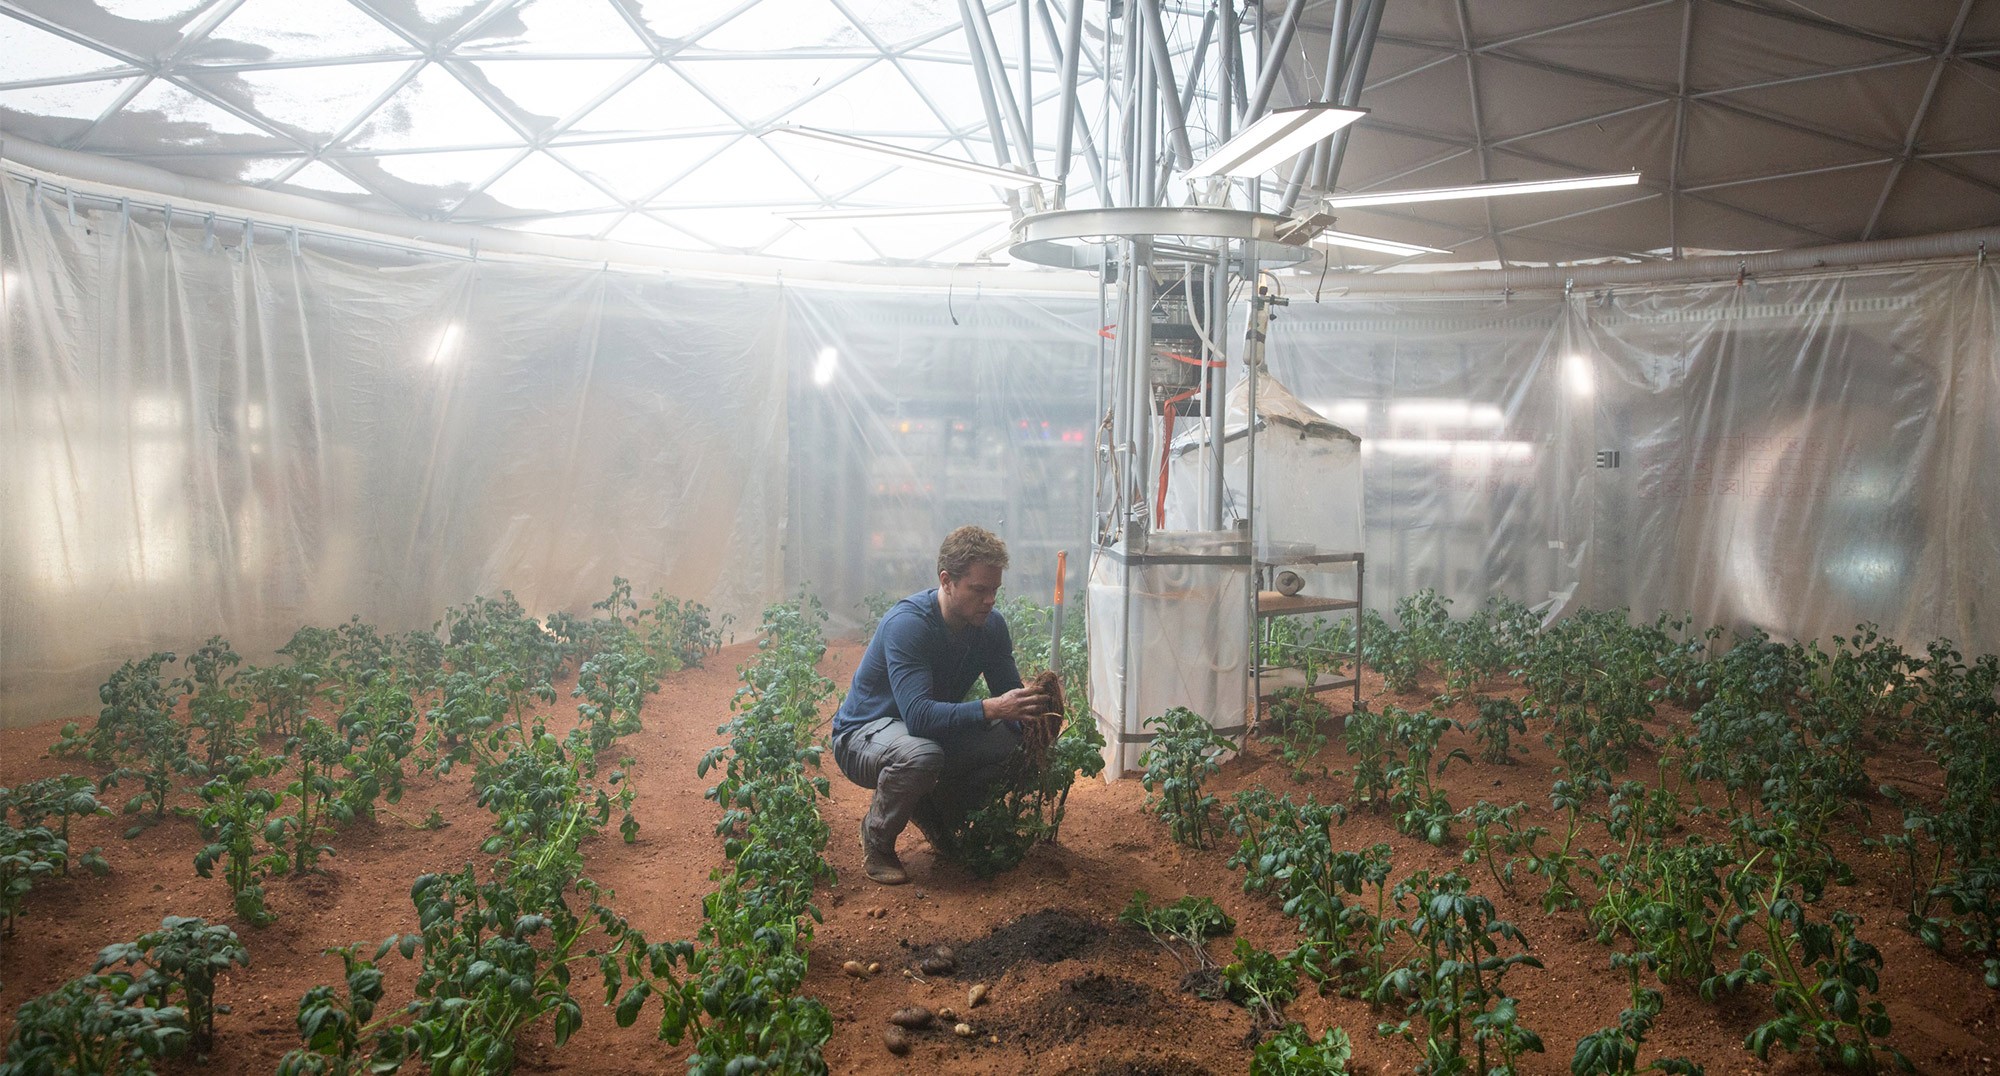 HD image from The Martian movie